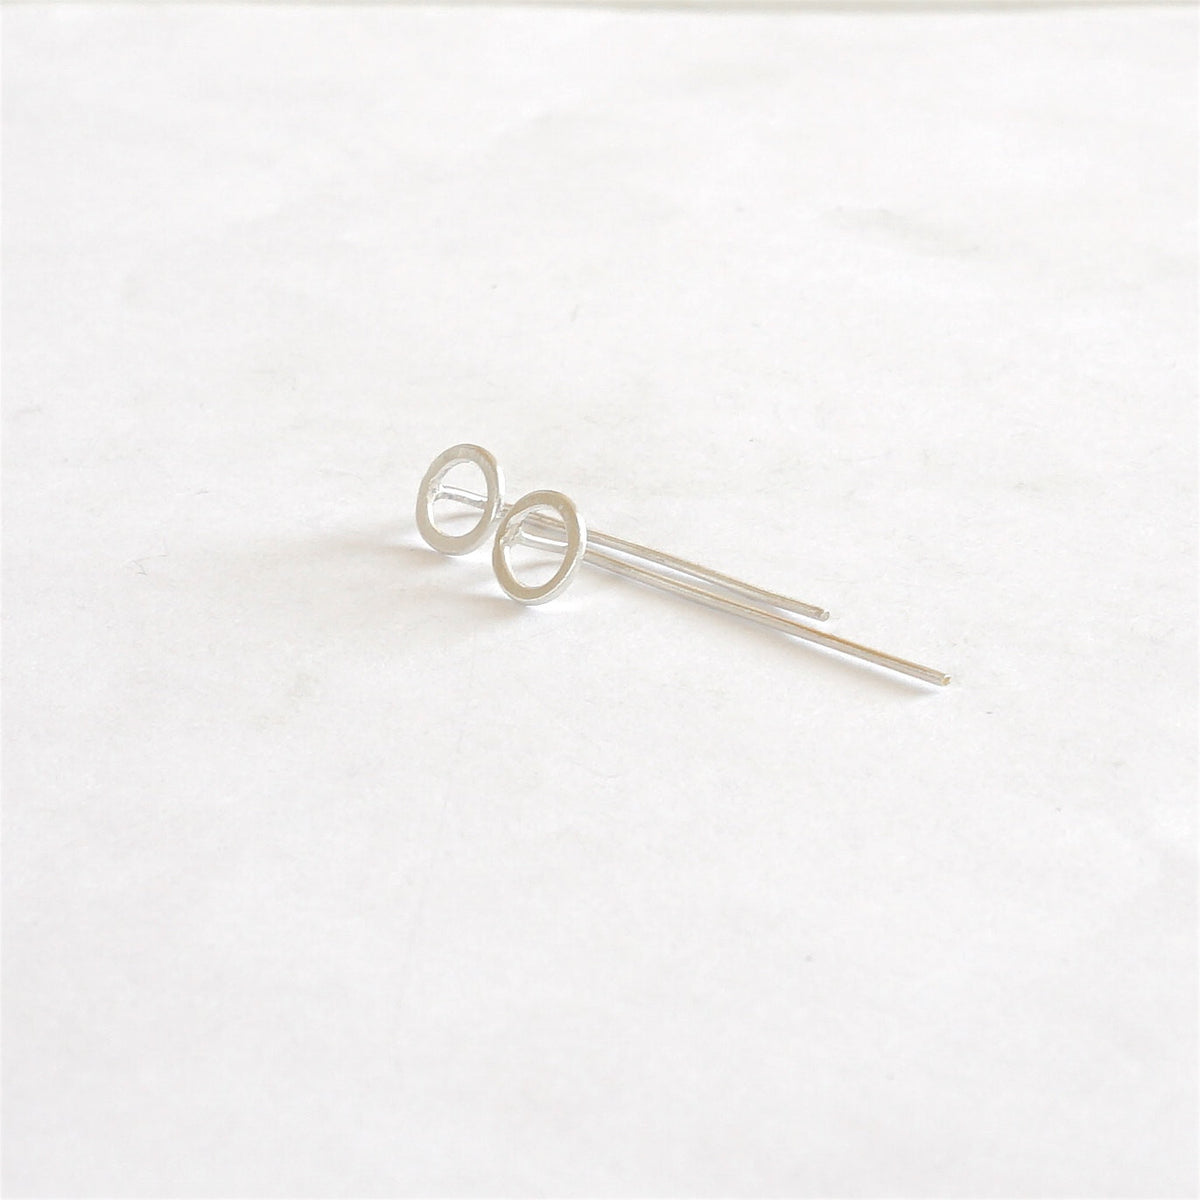 Sophisticated and Tasteful, Hand-Crafted Open Circle Threader Earring - 0214 - Virginia Wynne Designs